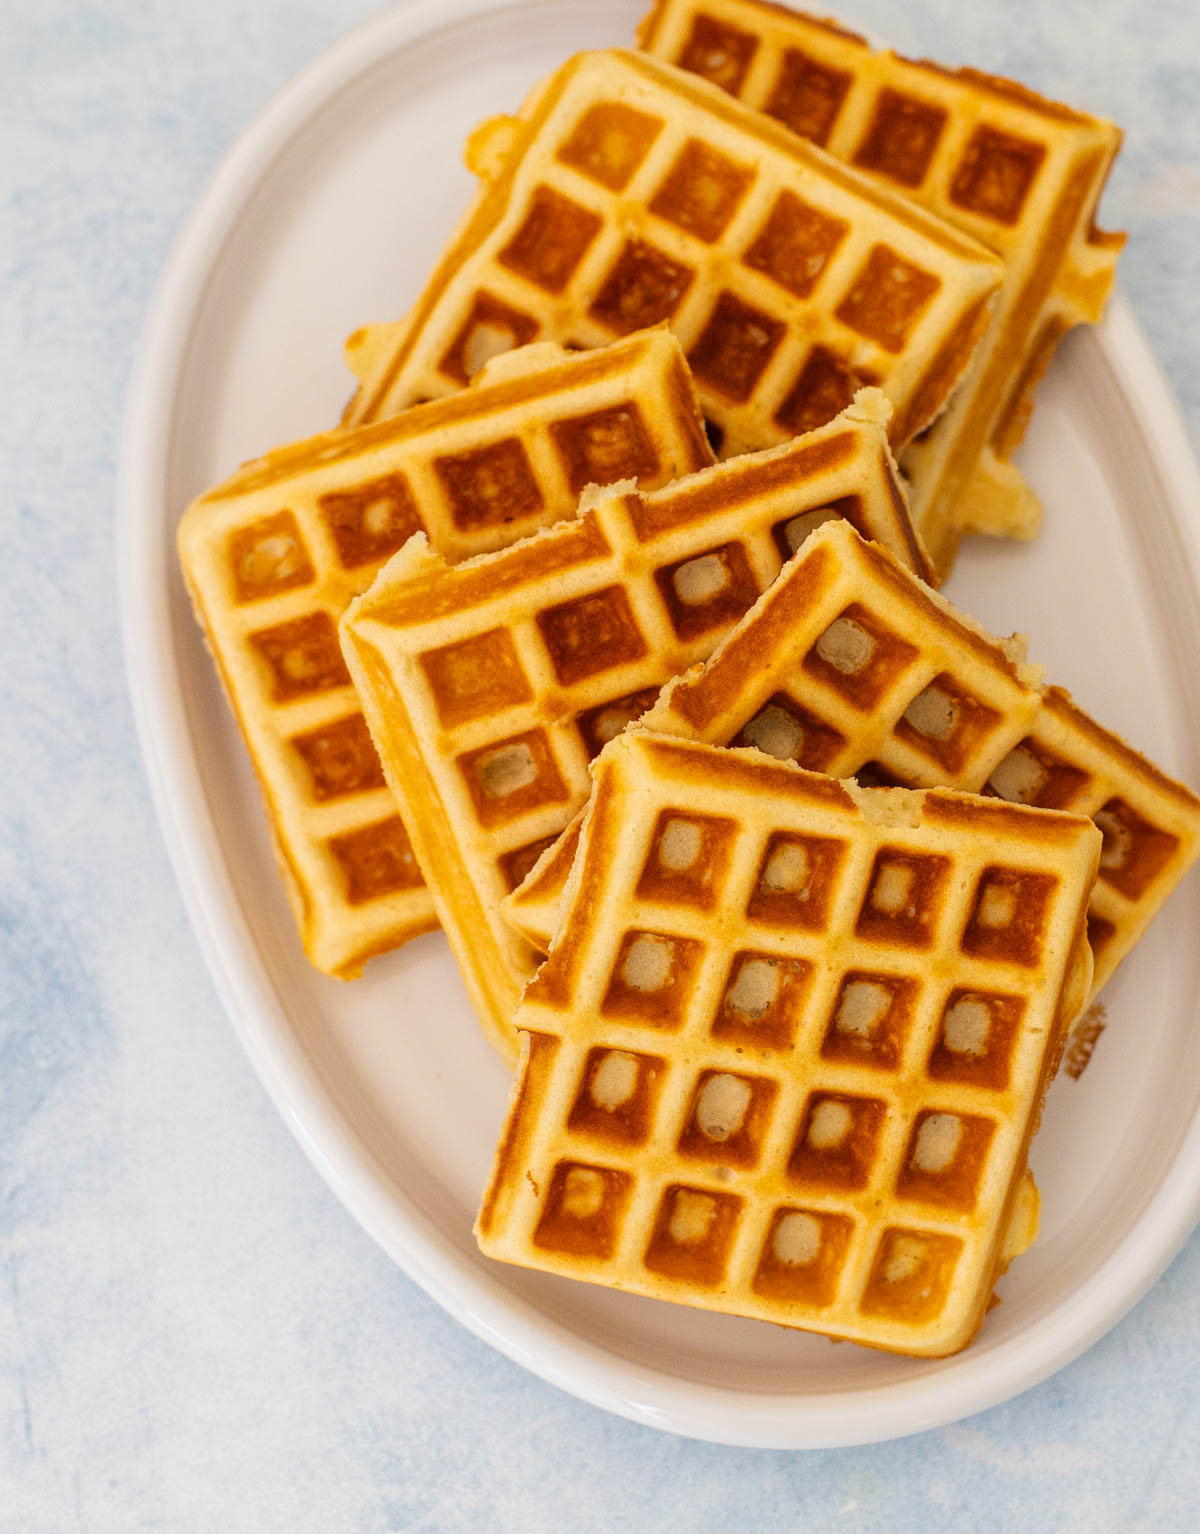 The malted waffles are on a white platter.